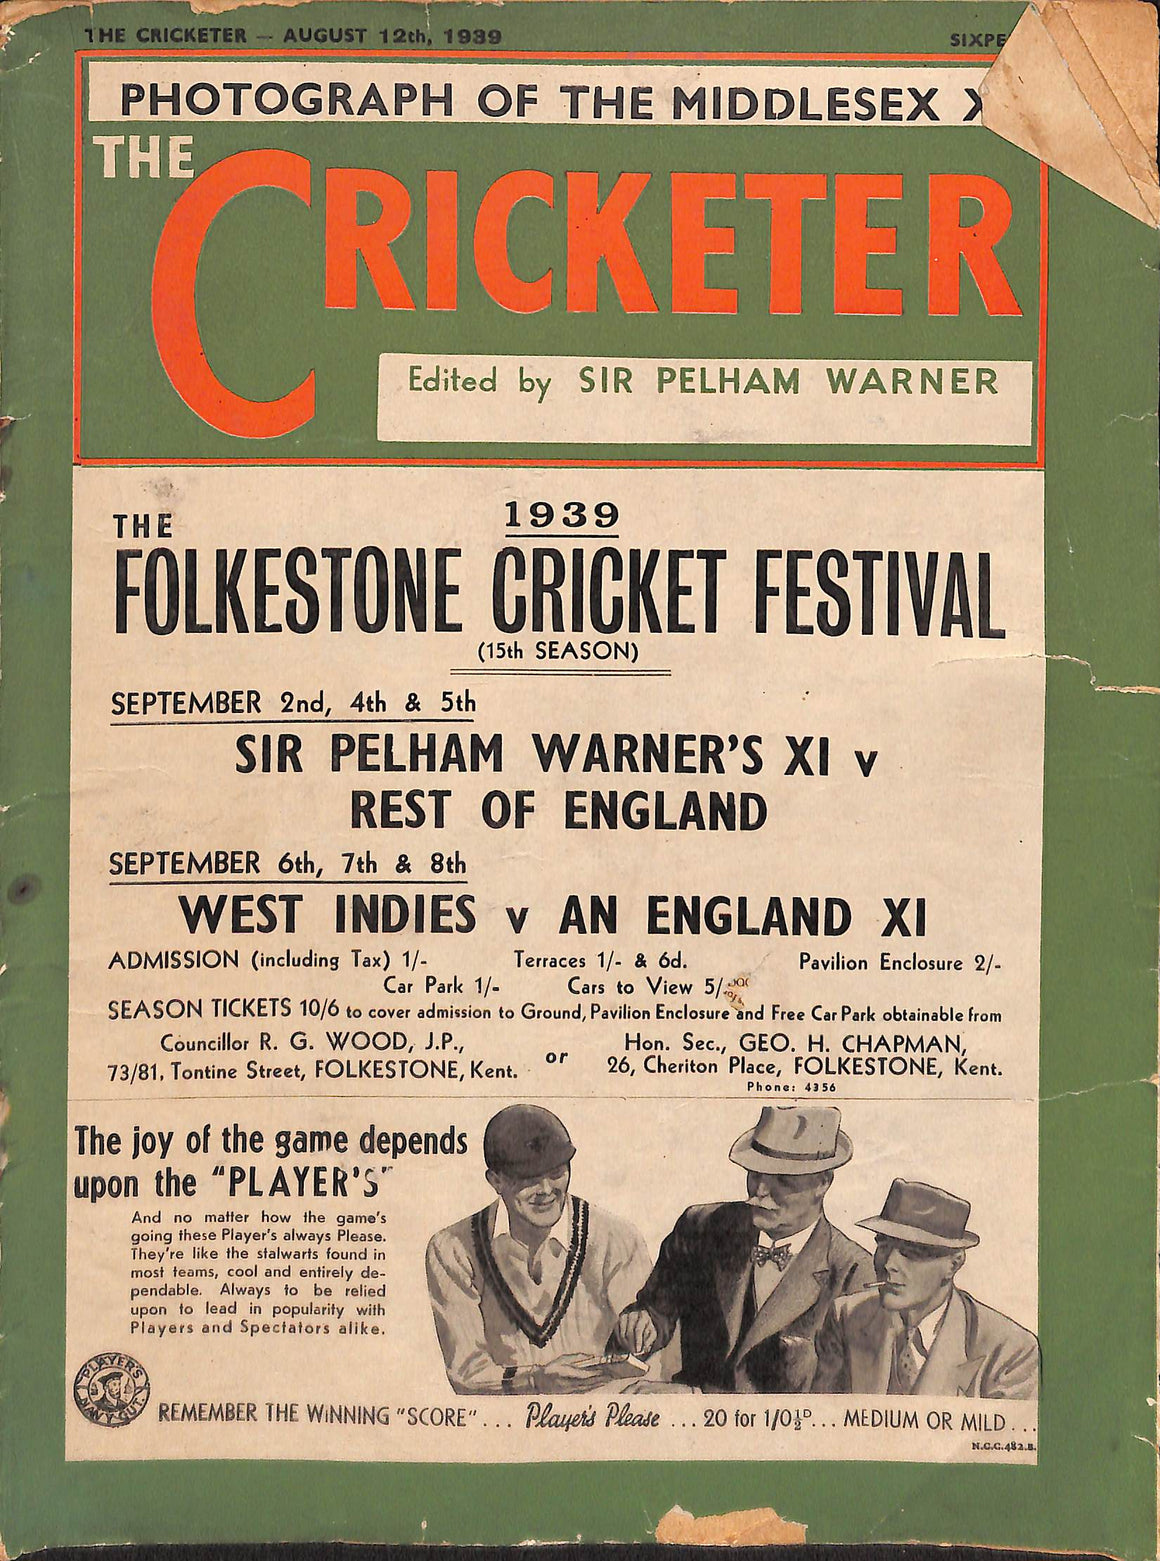 'The Cricketer - August 12, 1939'